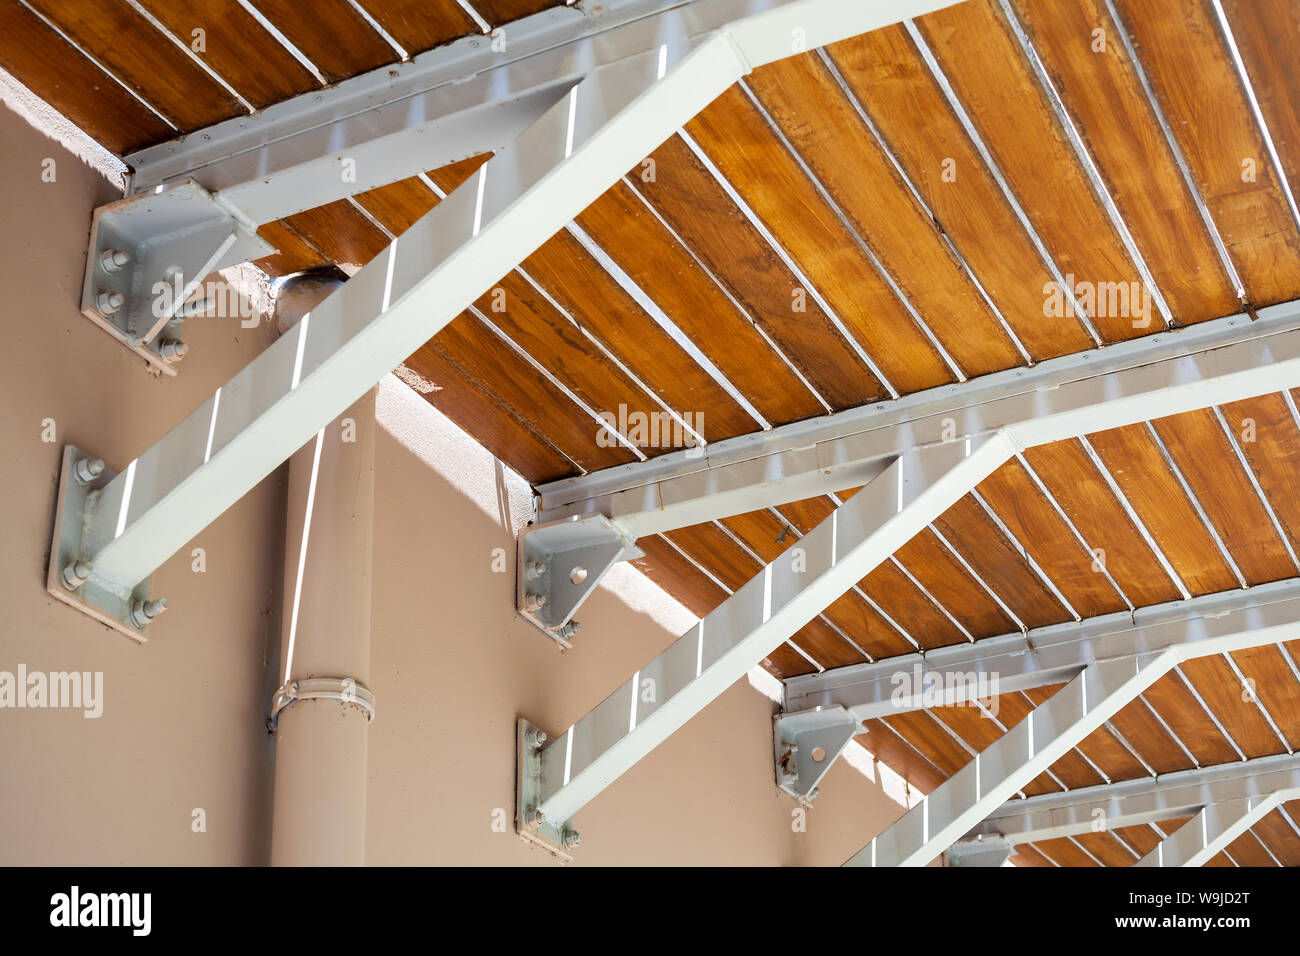 Wooden balcony floor mounted on cantilever beams, bottom view Stock Photo